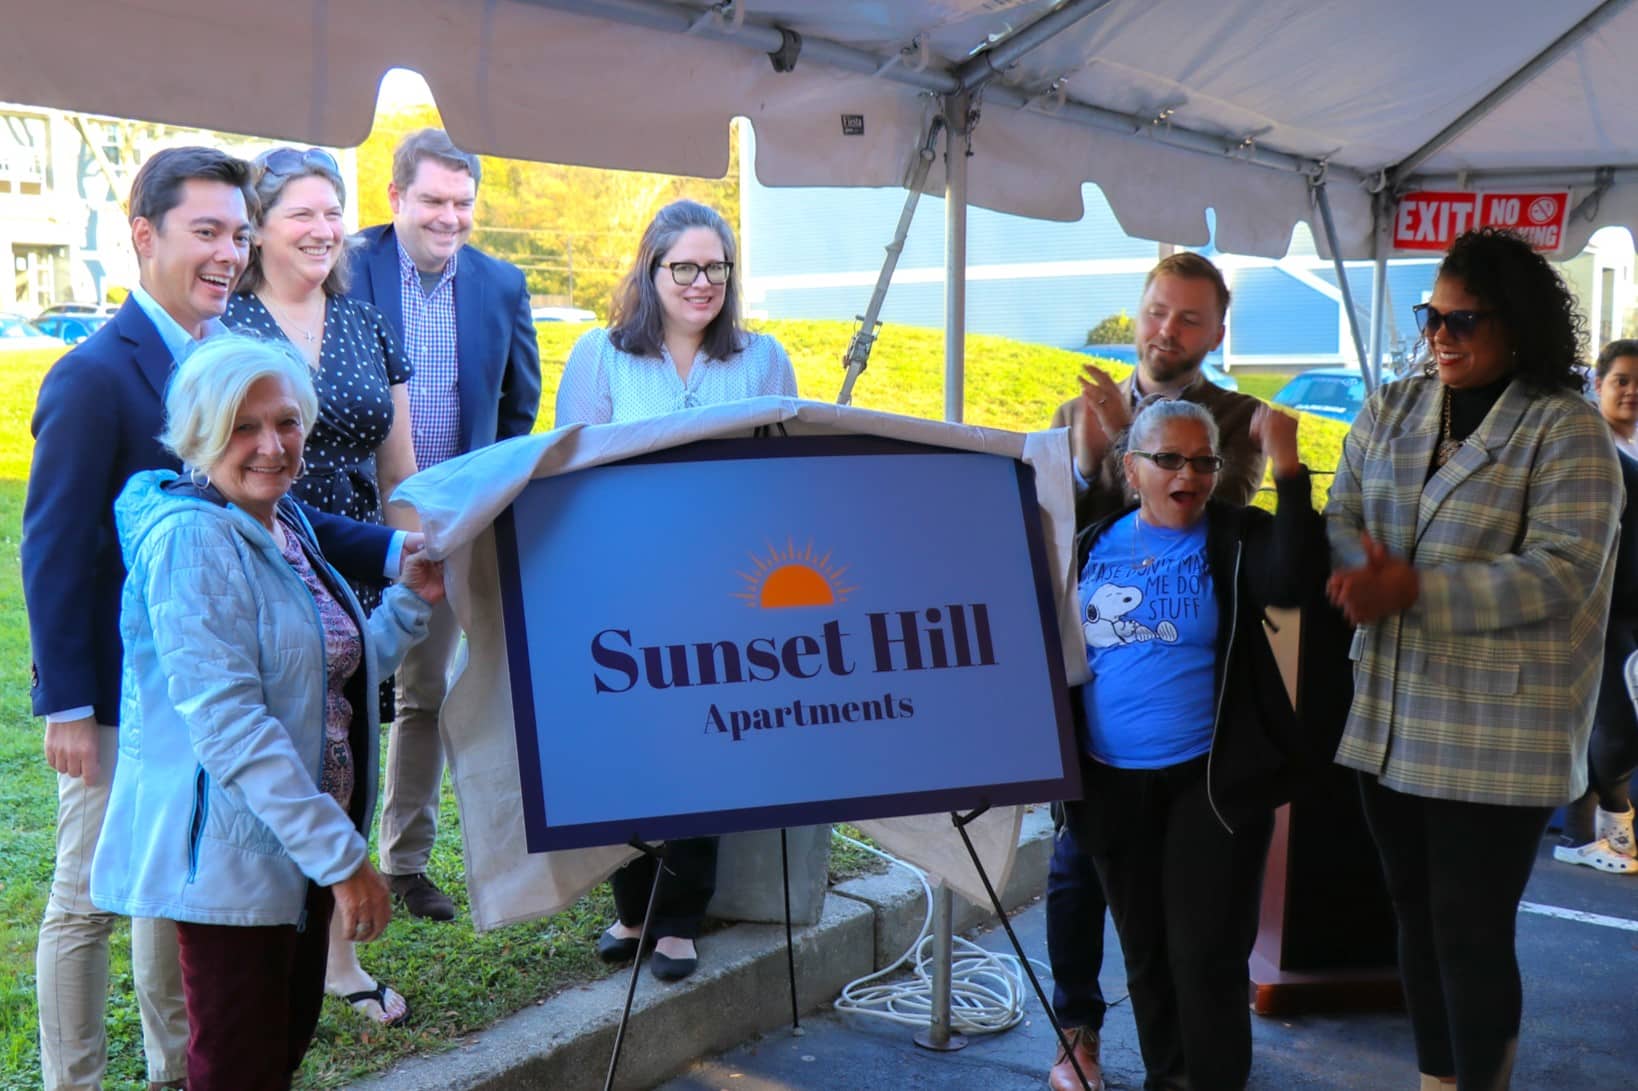 Sunset Hill Sign and people celebrating